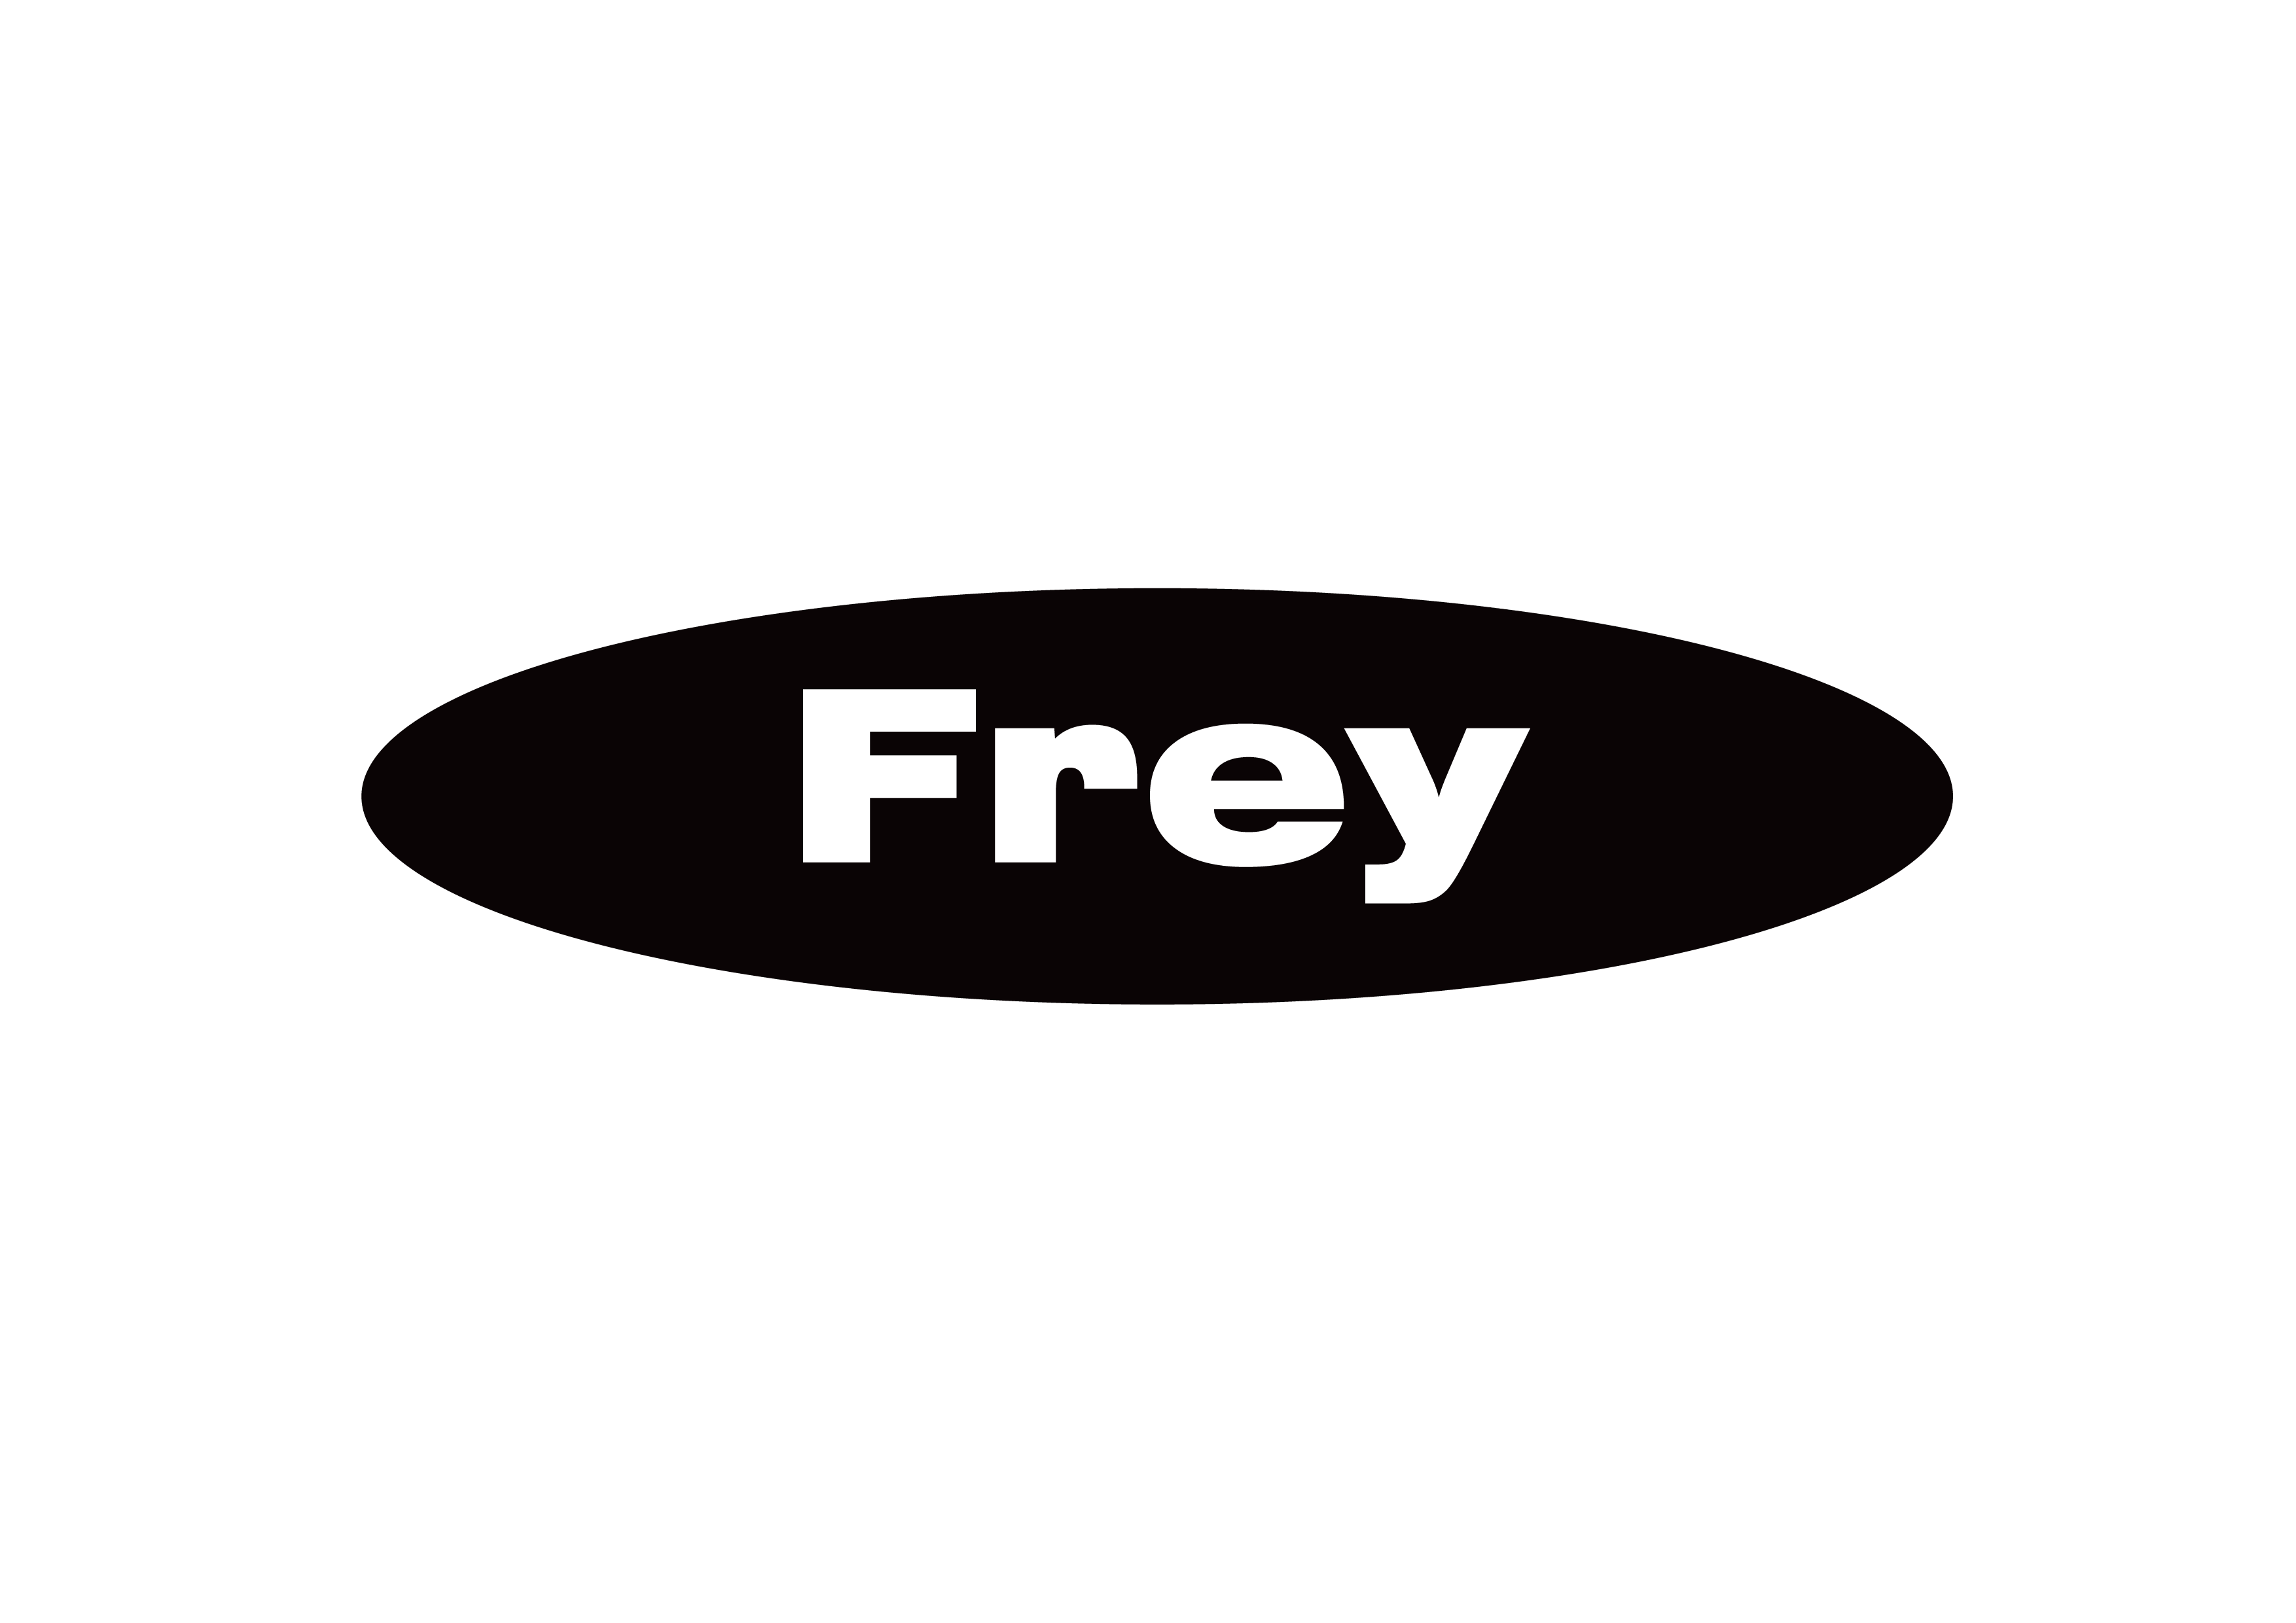 FREY - Ophthalmic diagnostic devices manufacturer